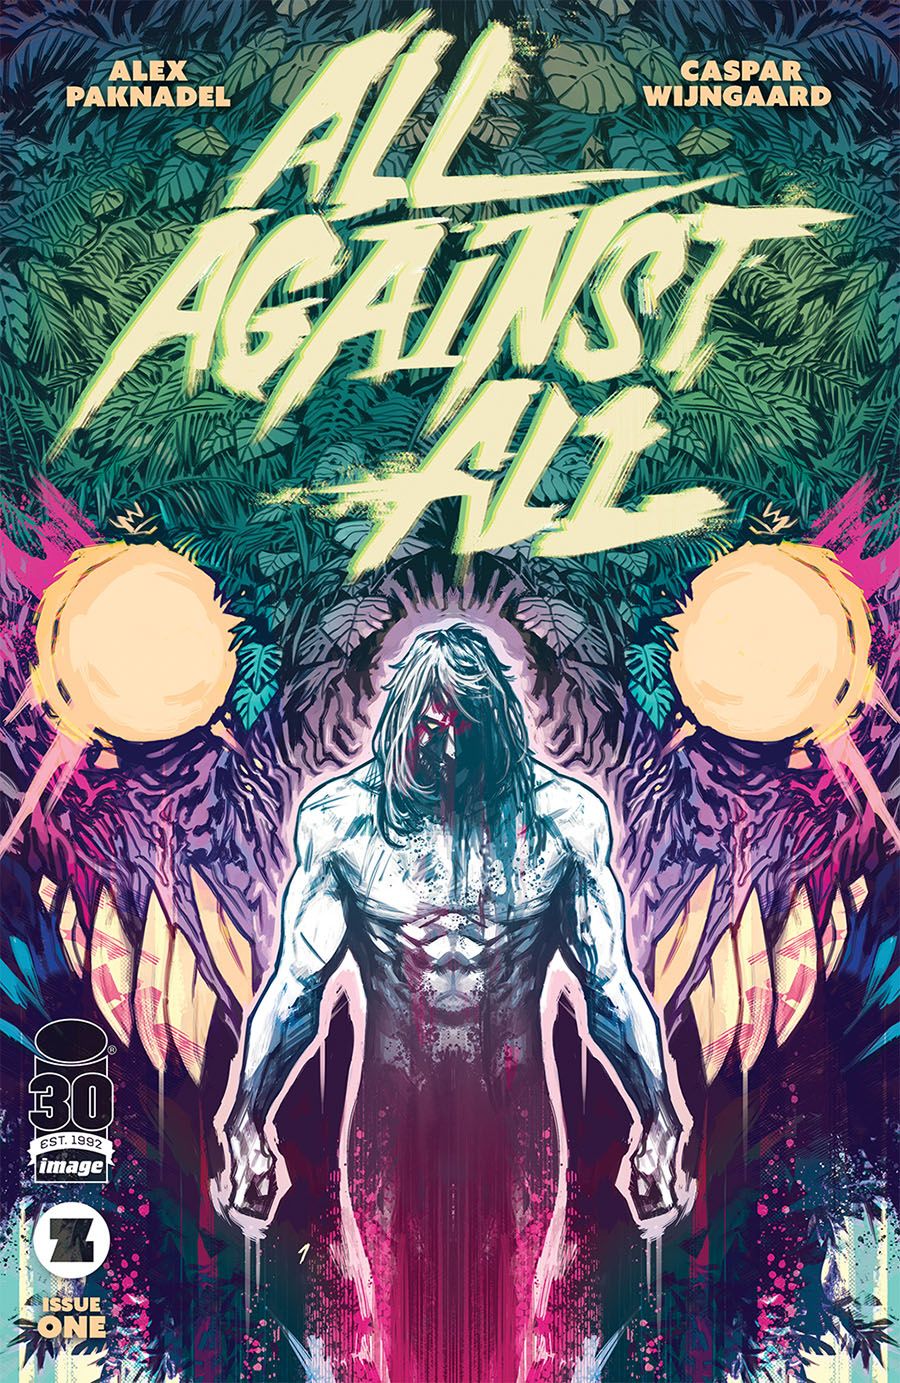 All Against All #1 cover